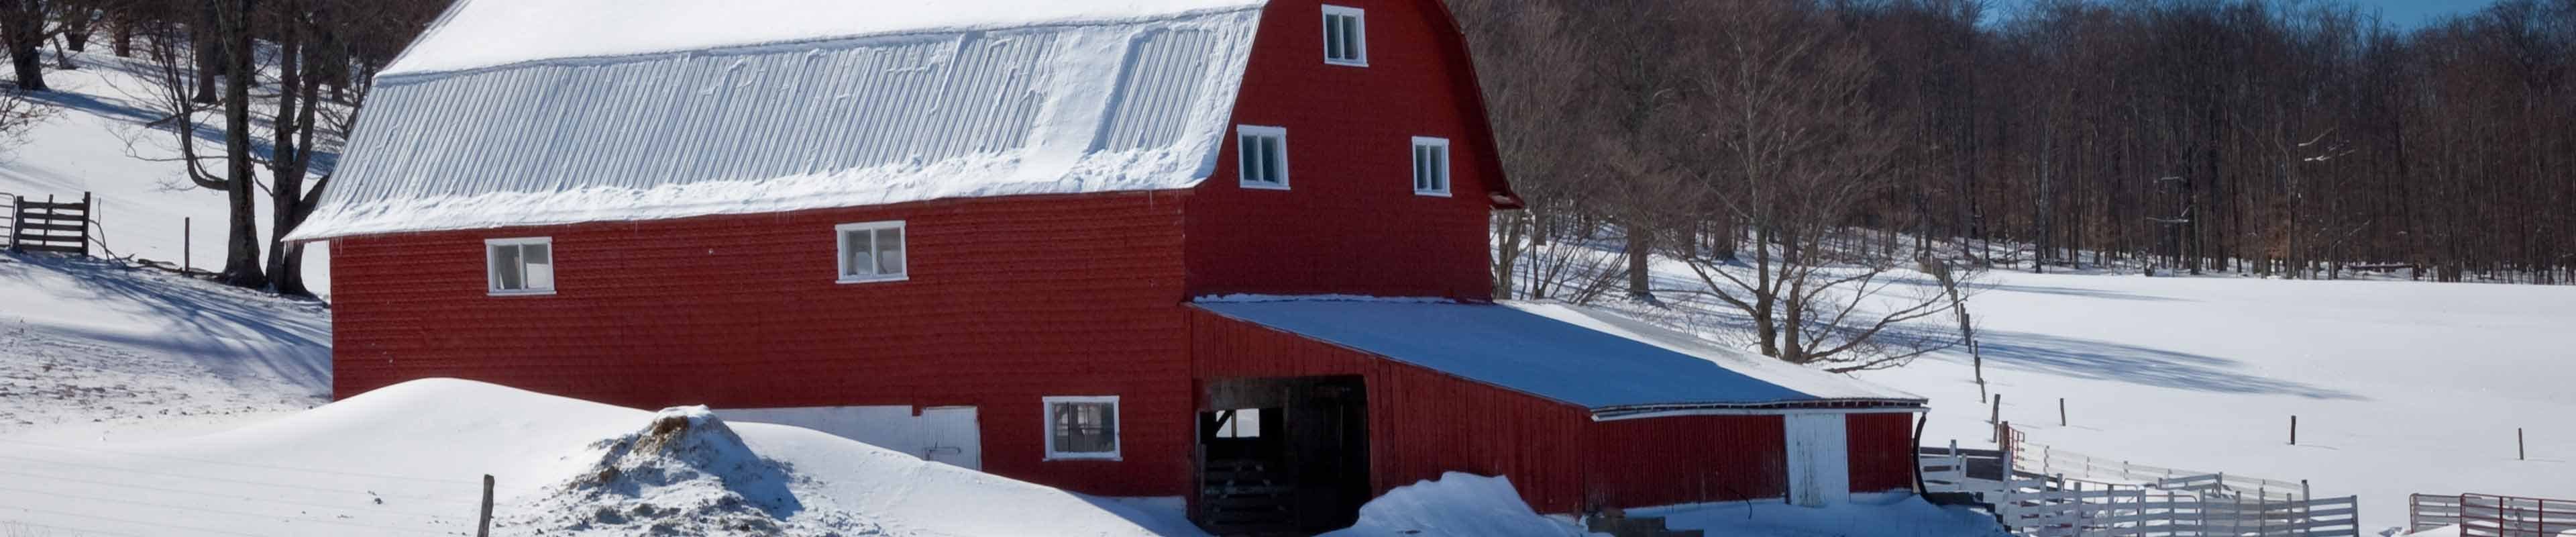 Snow overload on red barn roof on farm.